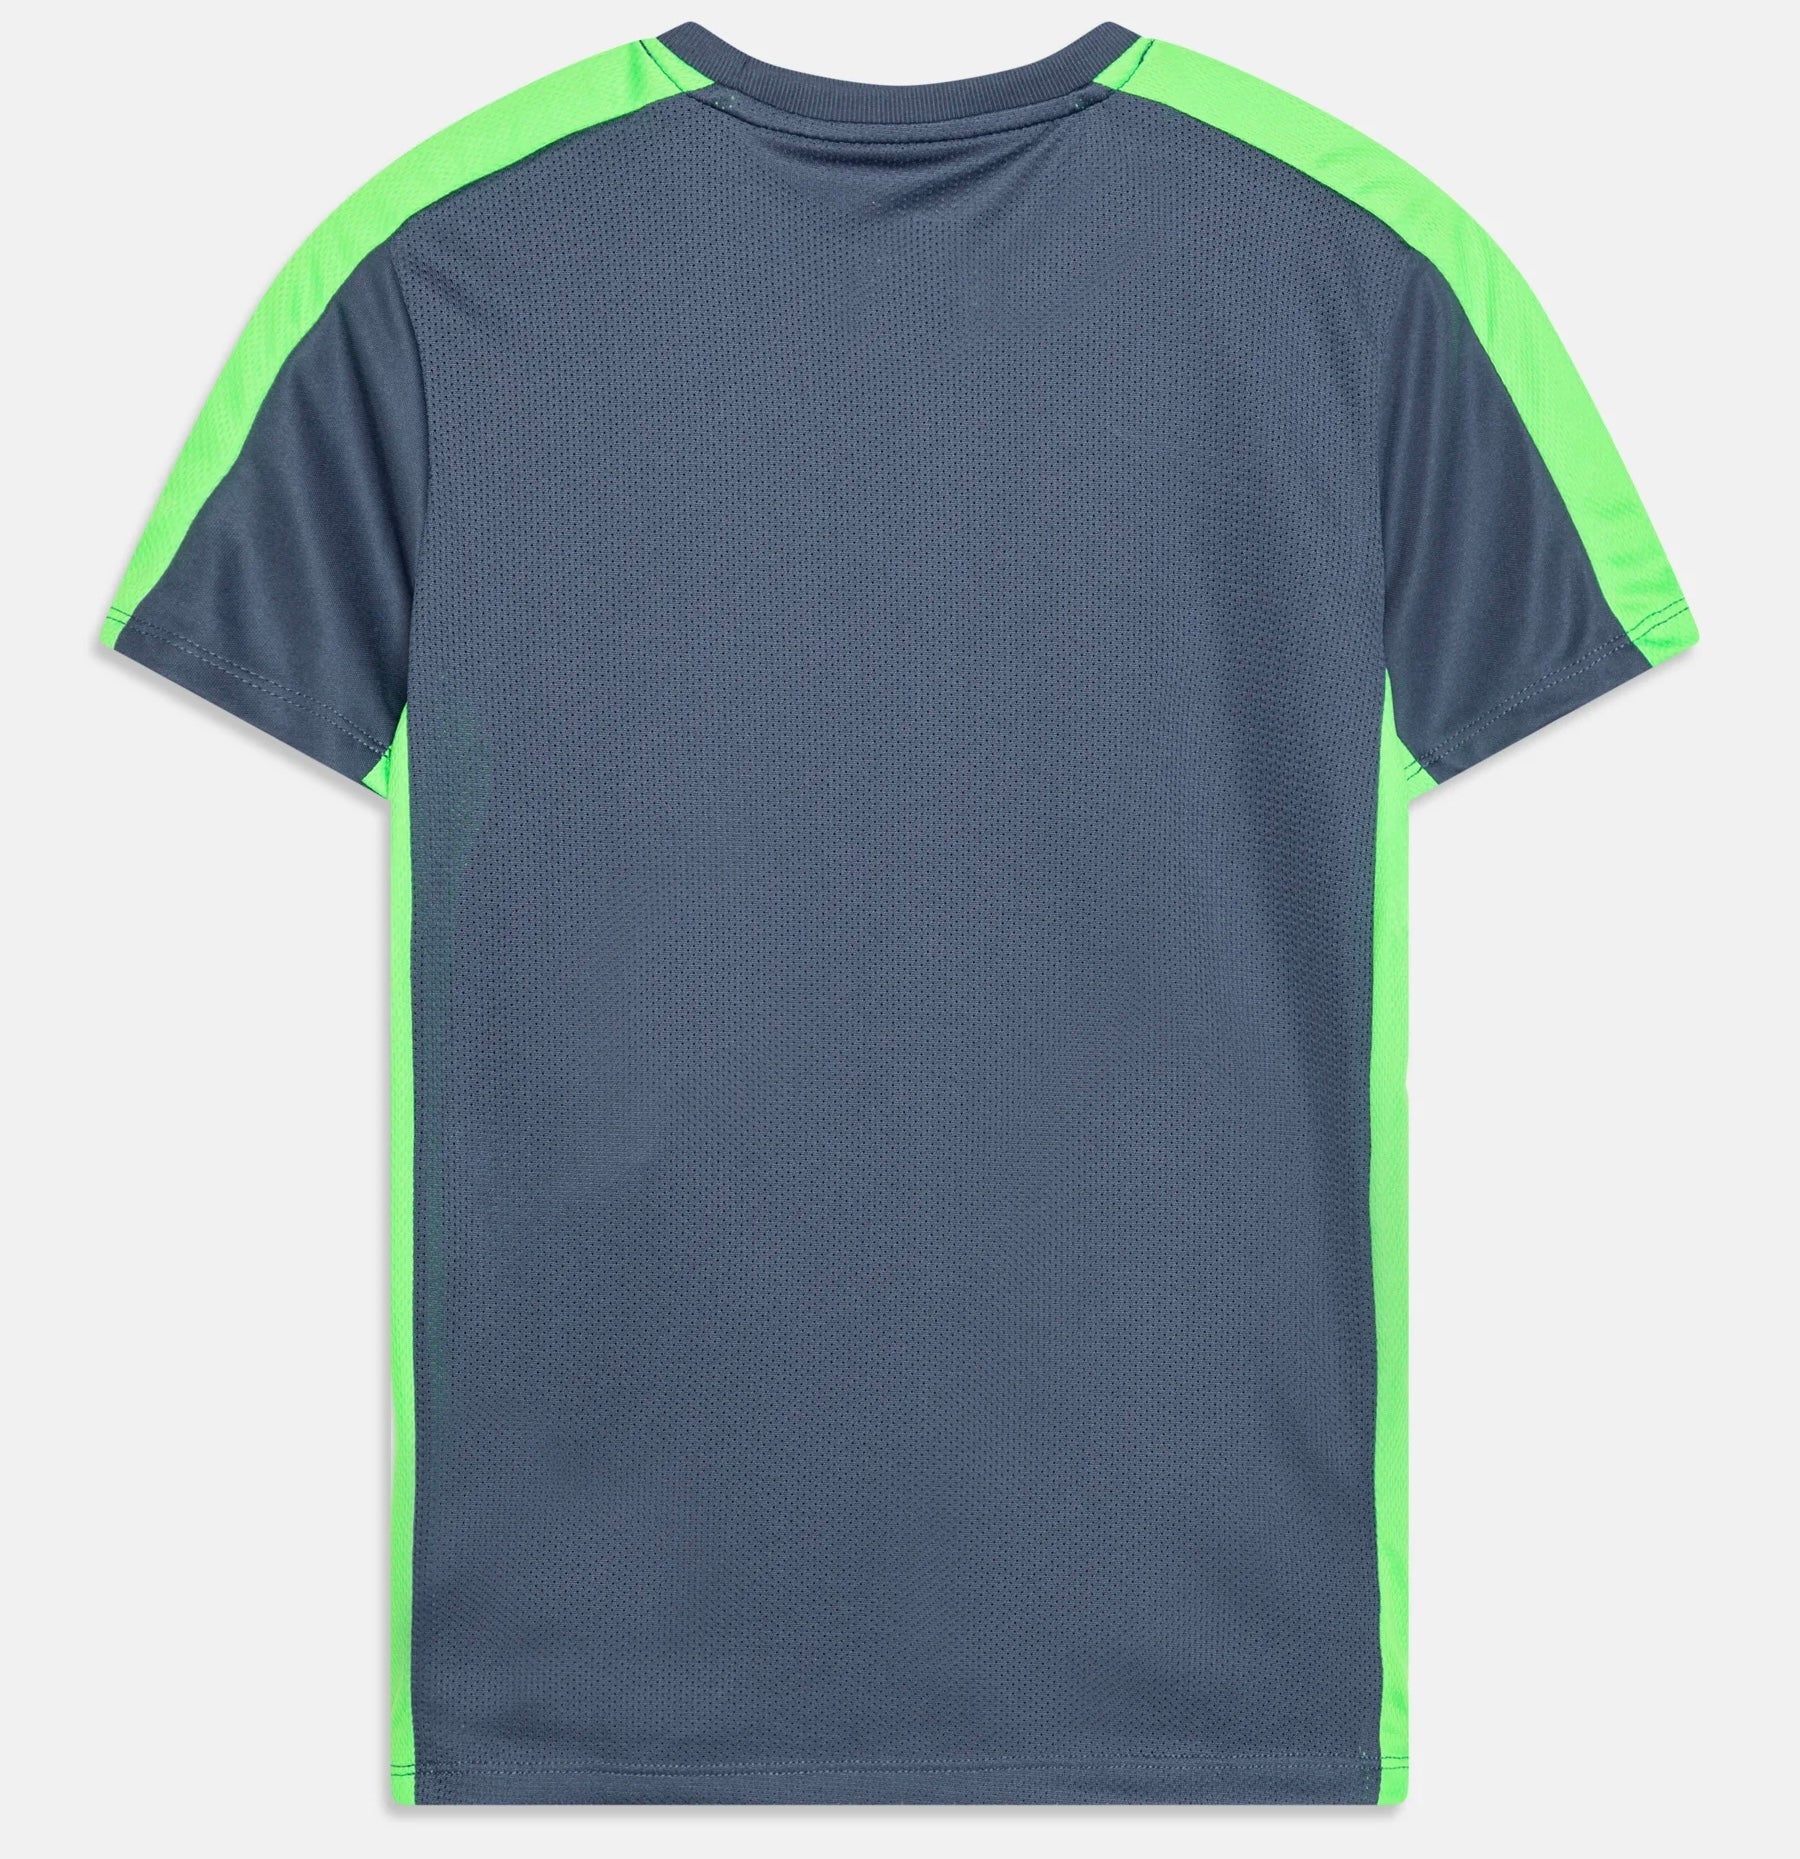 NIKE ACADEMY DRILL T-SHIRT - DIFFUSED BLUE